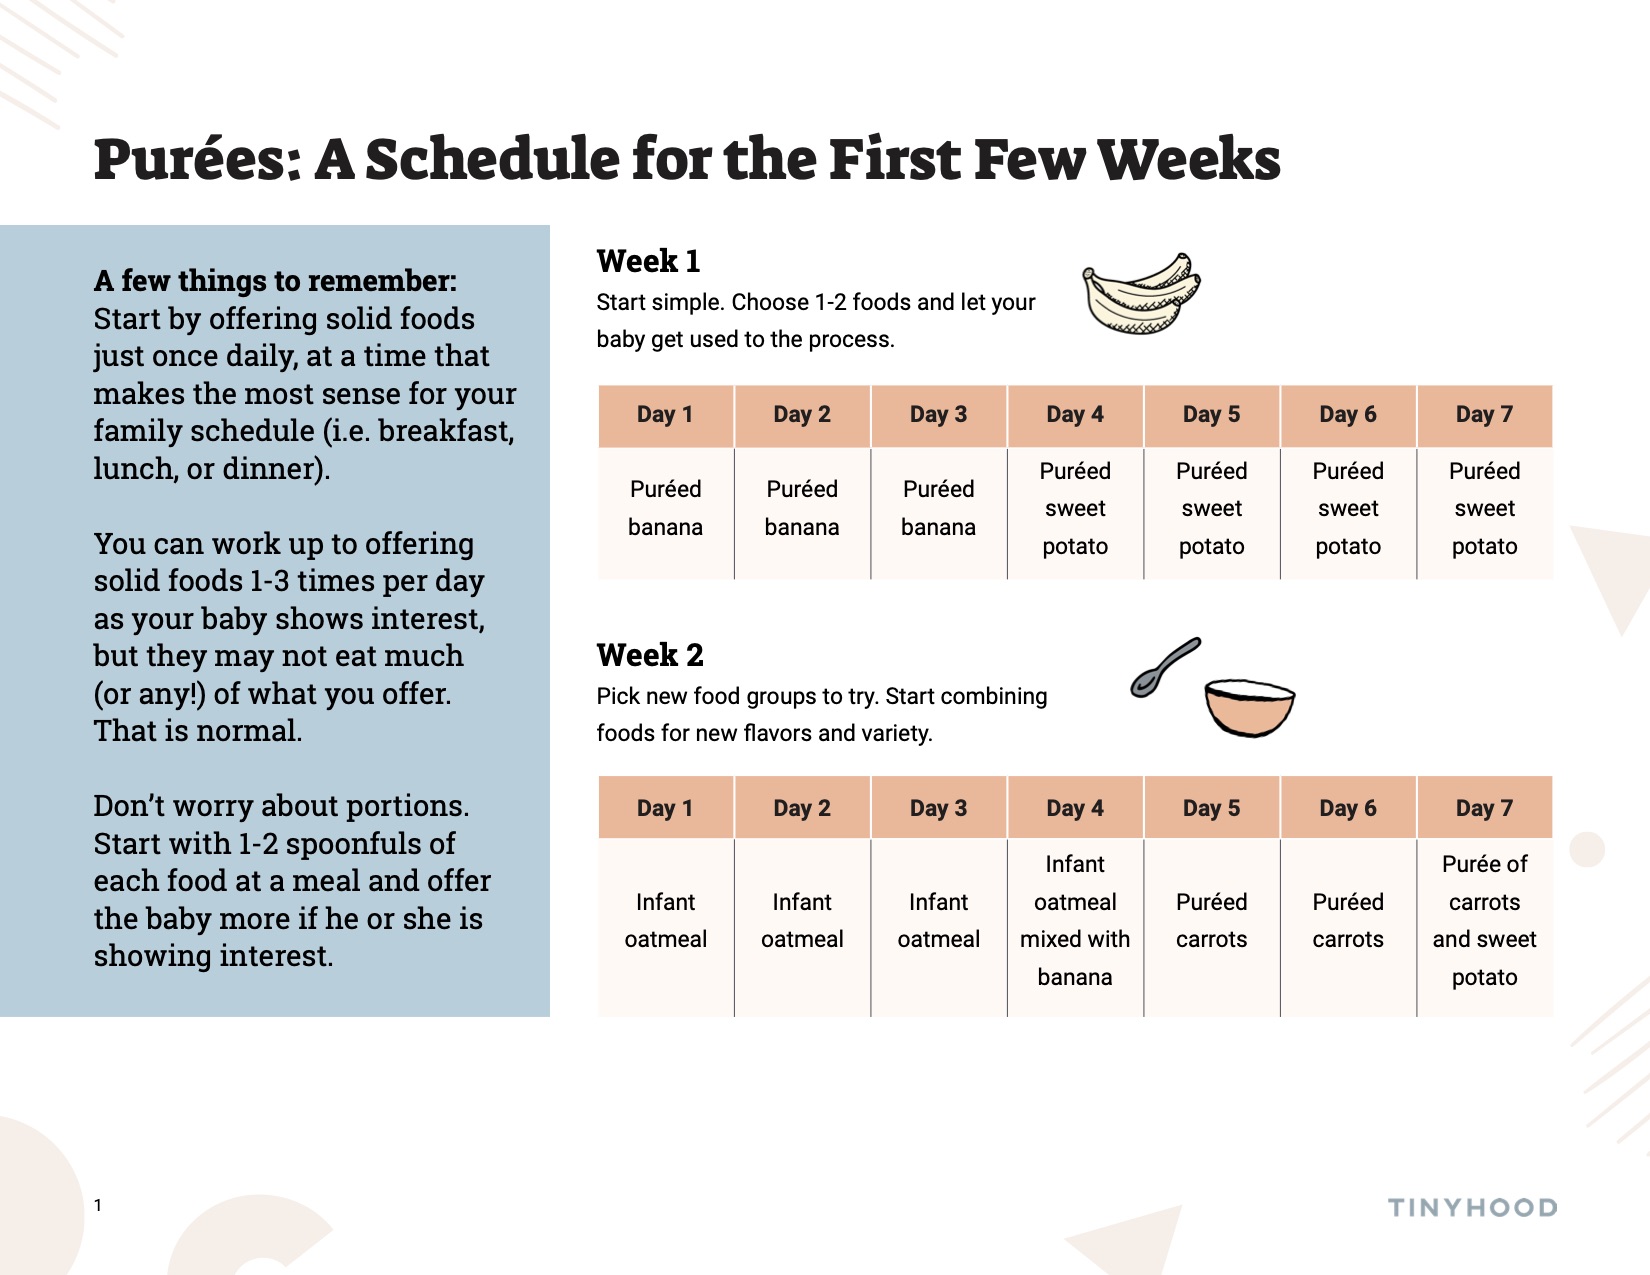 Starting Solids 101: What You Need to Know - Super Healthy Kids